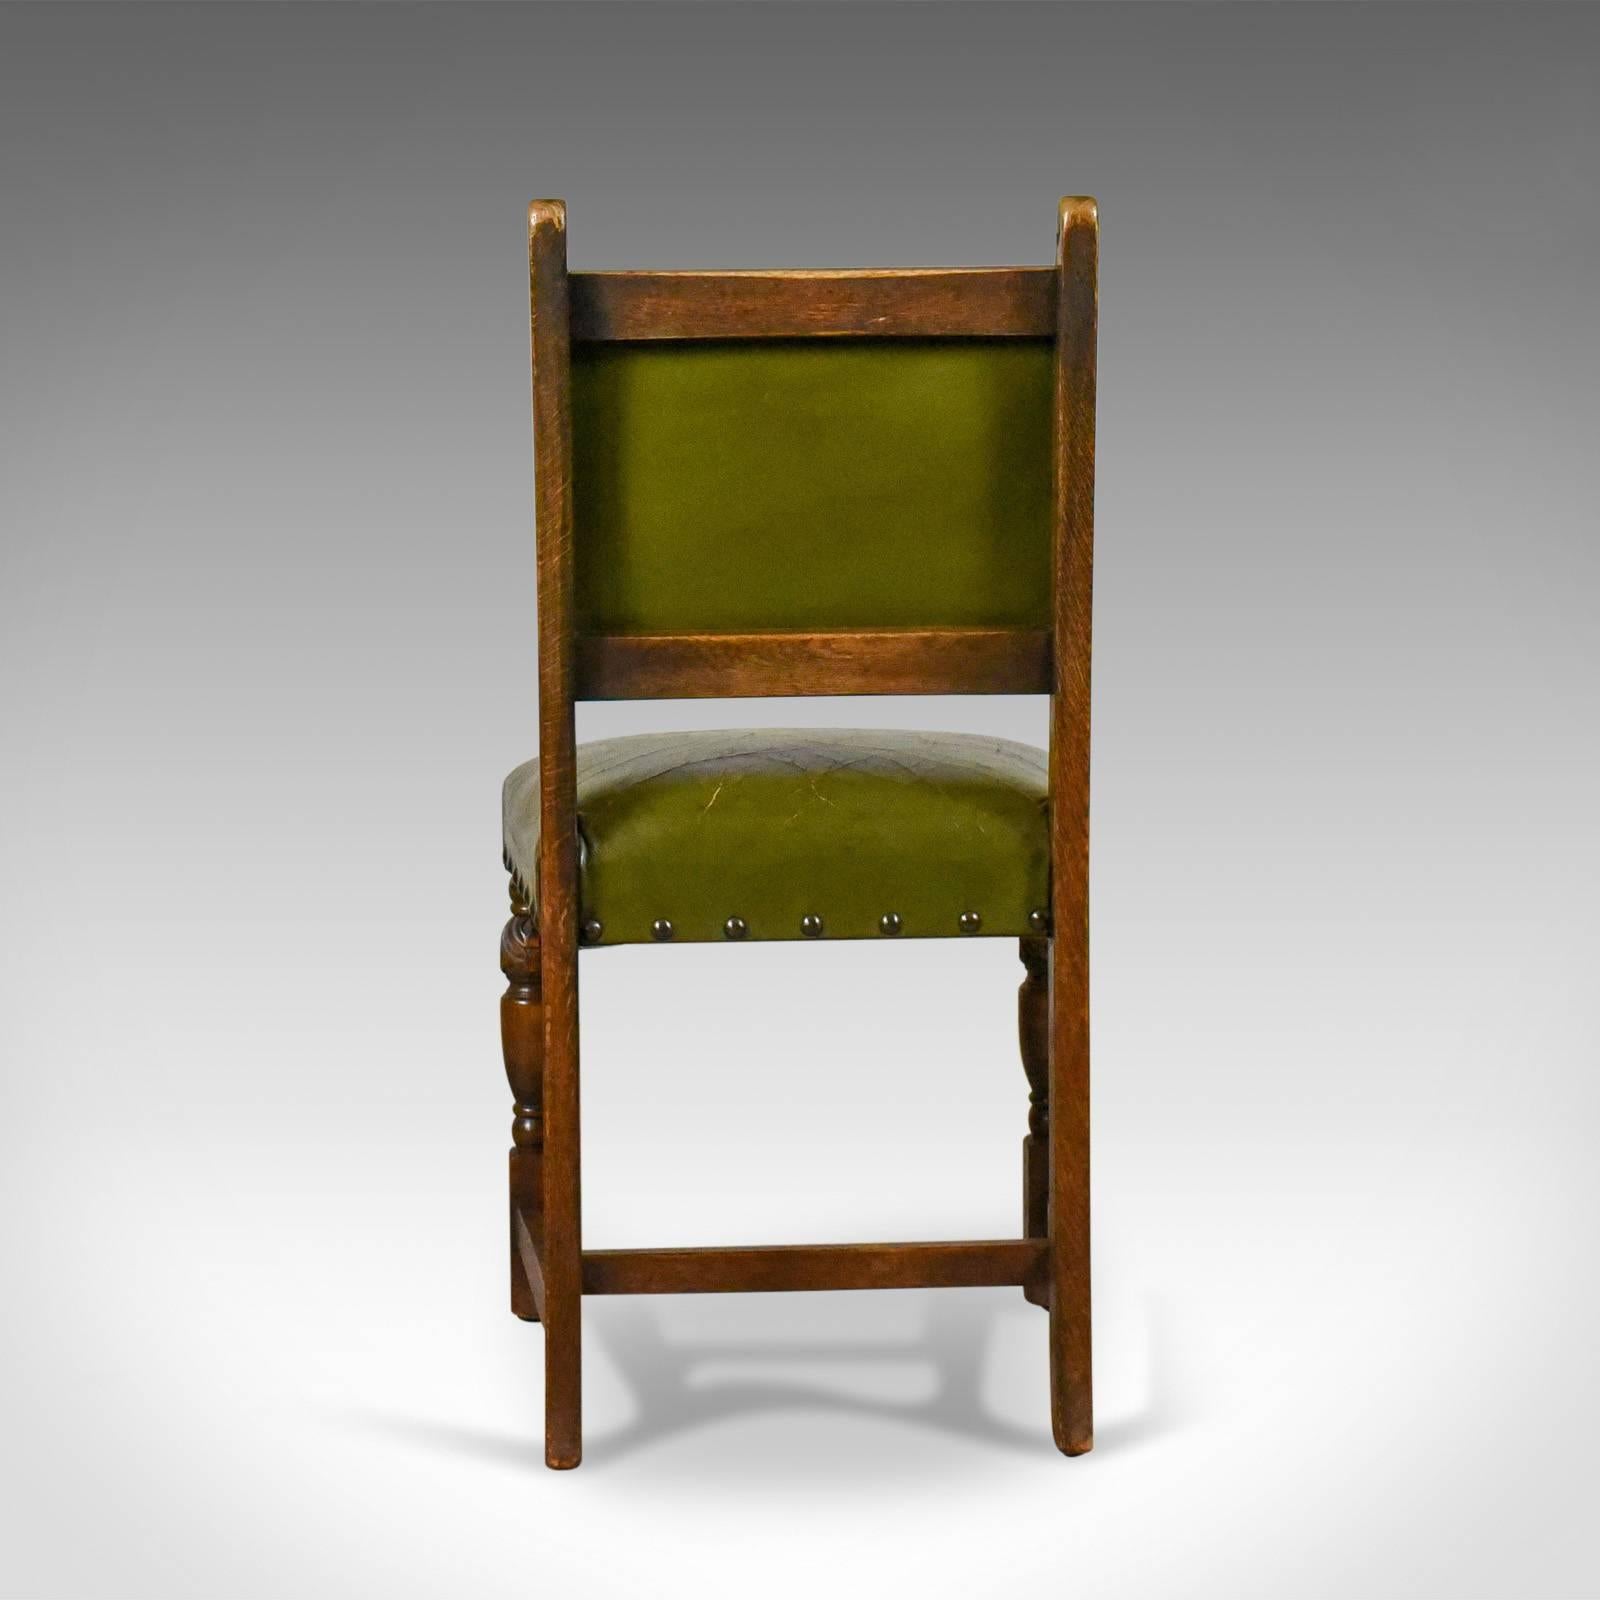 20th Century Set of Four Antique Dining Chairs, Jacobean Revival, English Oak, circa 1910